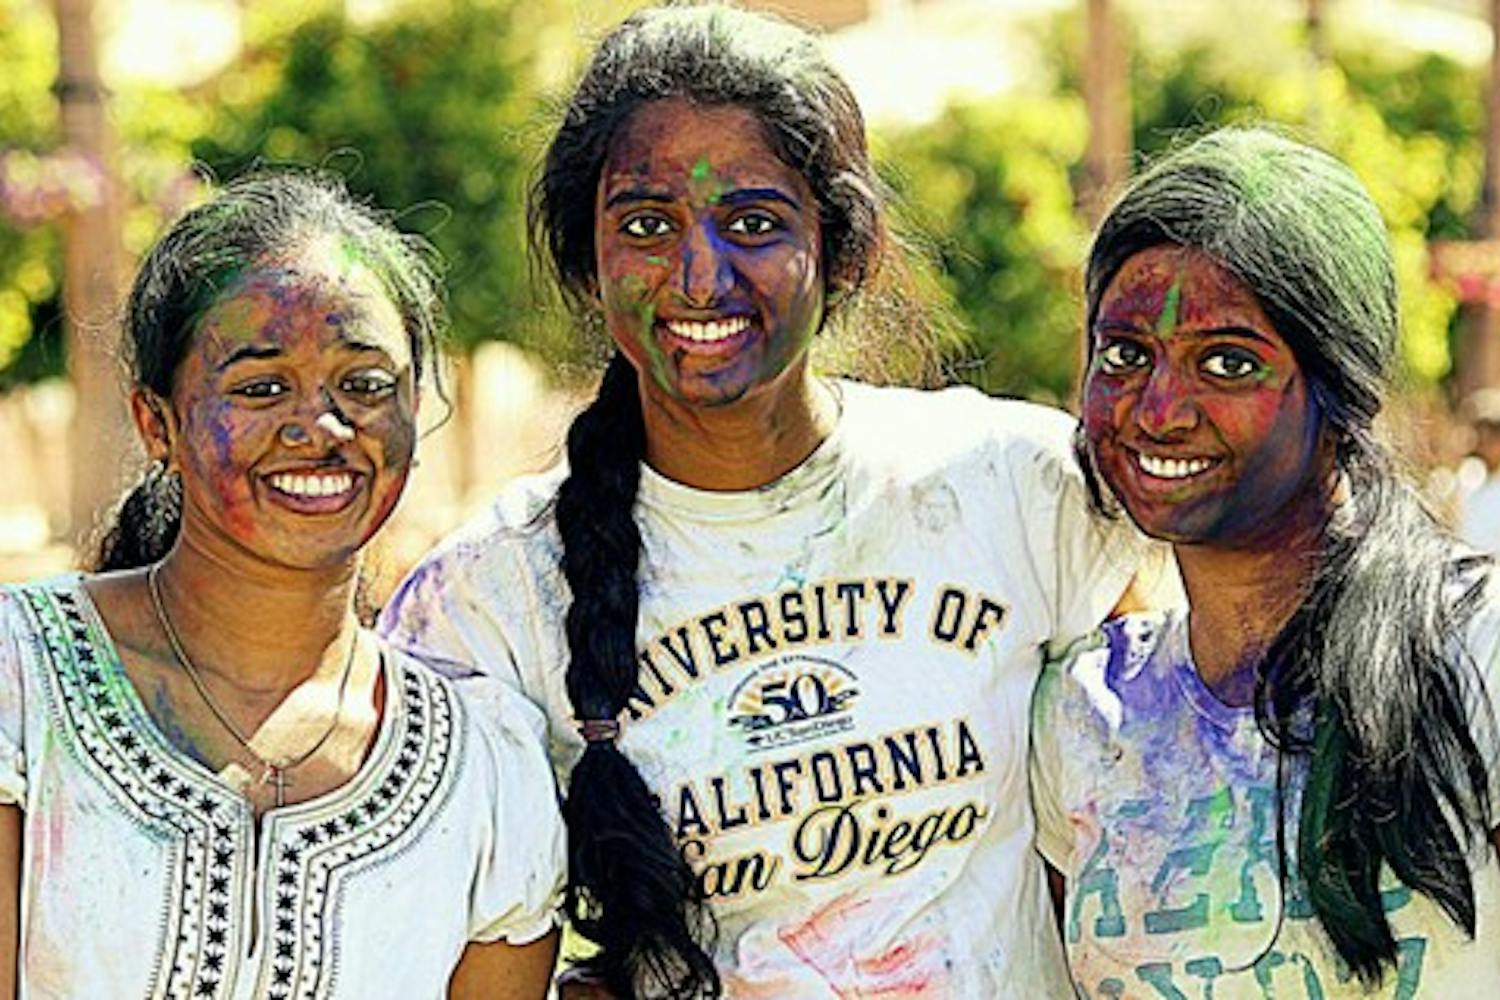 ASU students (from left) Nimisha Joseph, Divya Geetha Nair and Trupti Nair are covered in paint during Holi, the Hindu festival of colors, on March 10. Participants smear paint, powder and dyes all over one another to celebrate the arrival of spring. (Photo courtesy of Anand Aravamudhan)